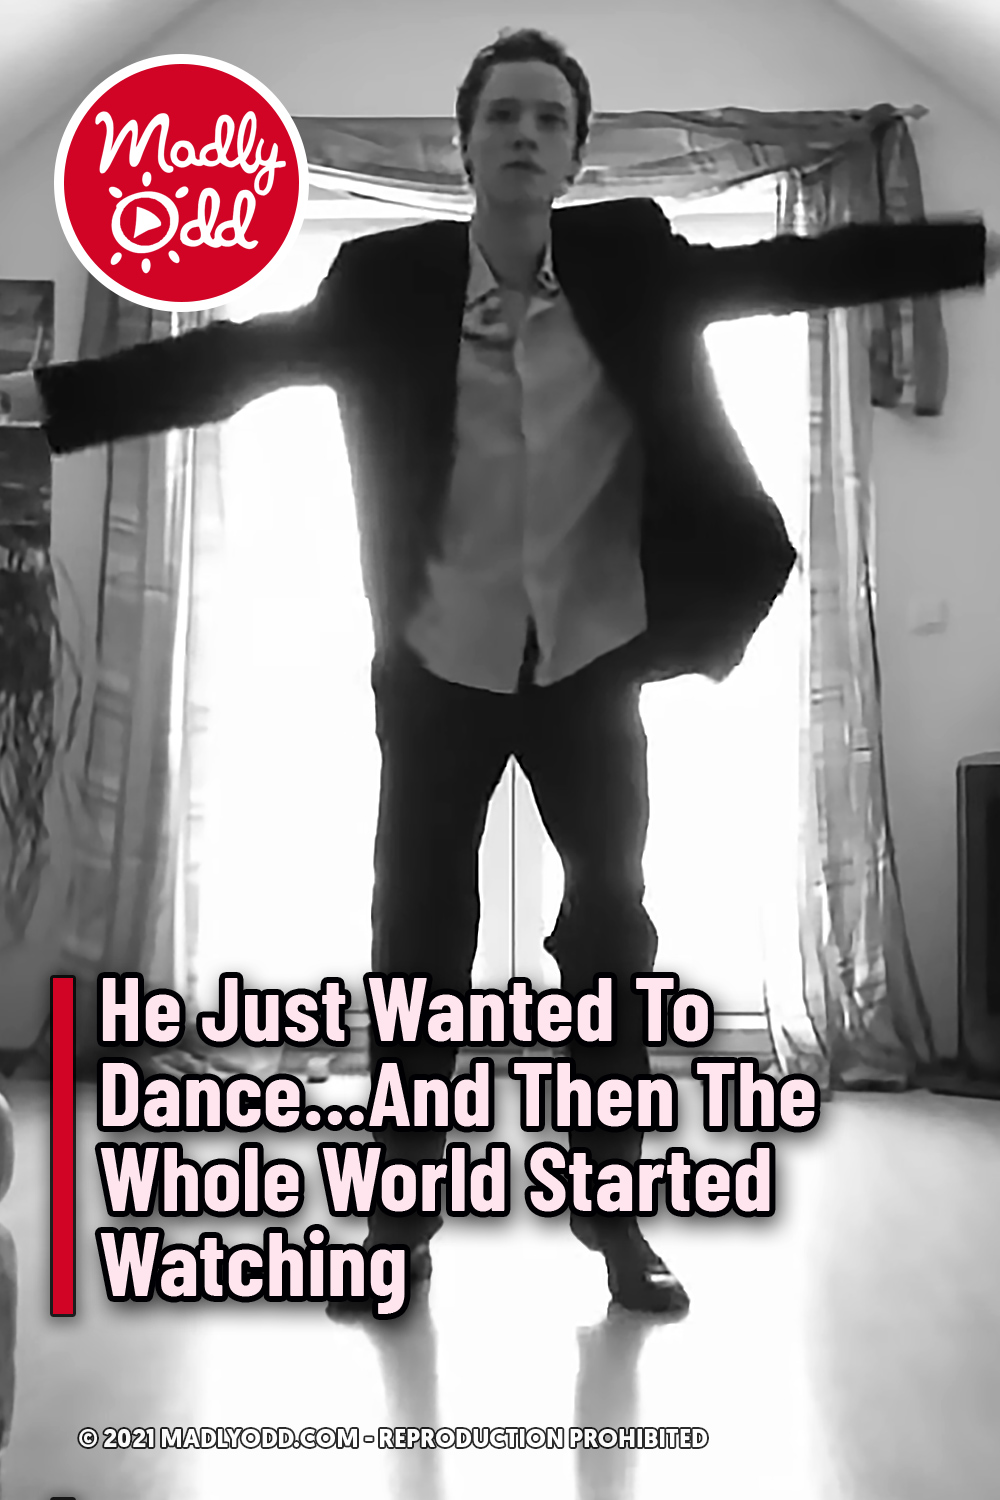 He Just Wanted To Dance...And Then The Whole World Started Watching